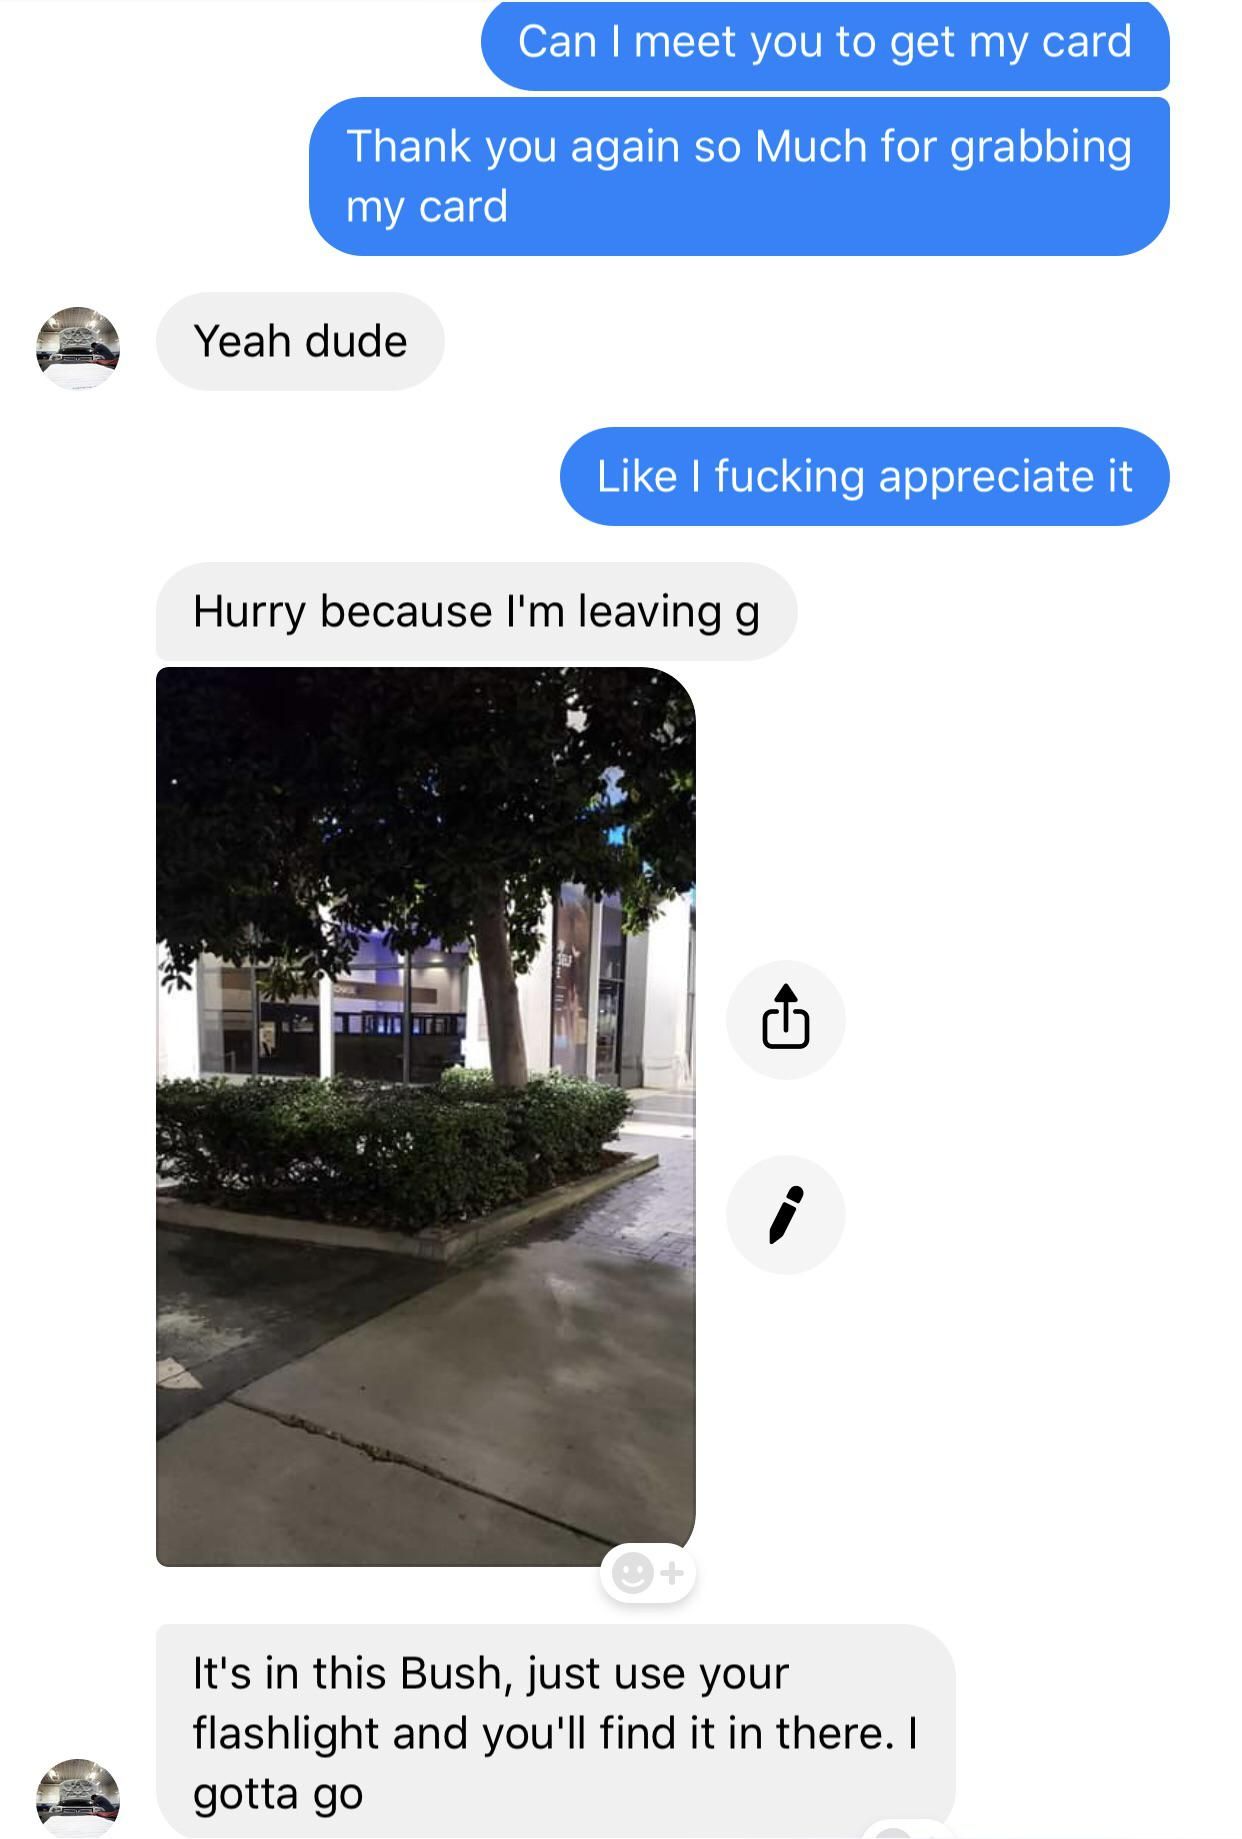 Went out to the bars and dropped my card. Drunk guy found it & messaged me on Facebook saying that he put it in a bush for me to find. He did his best